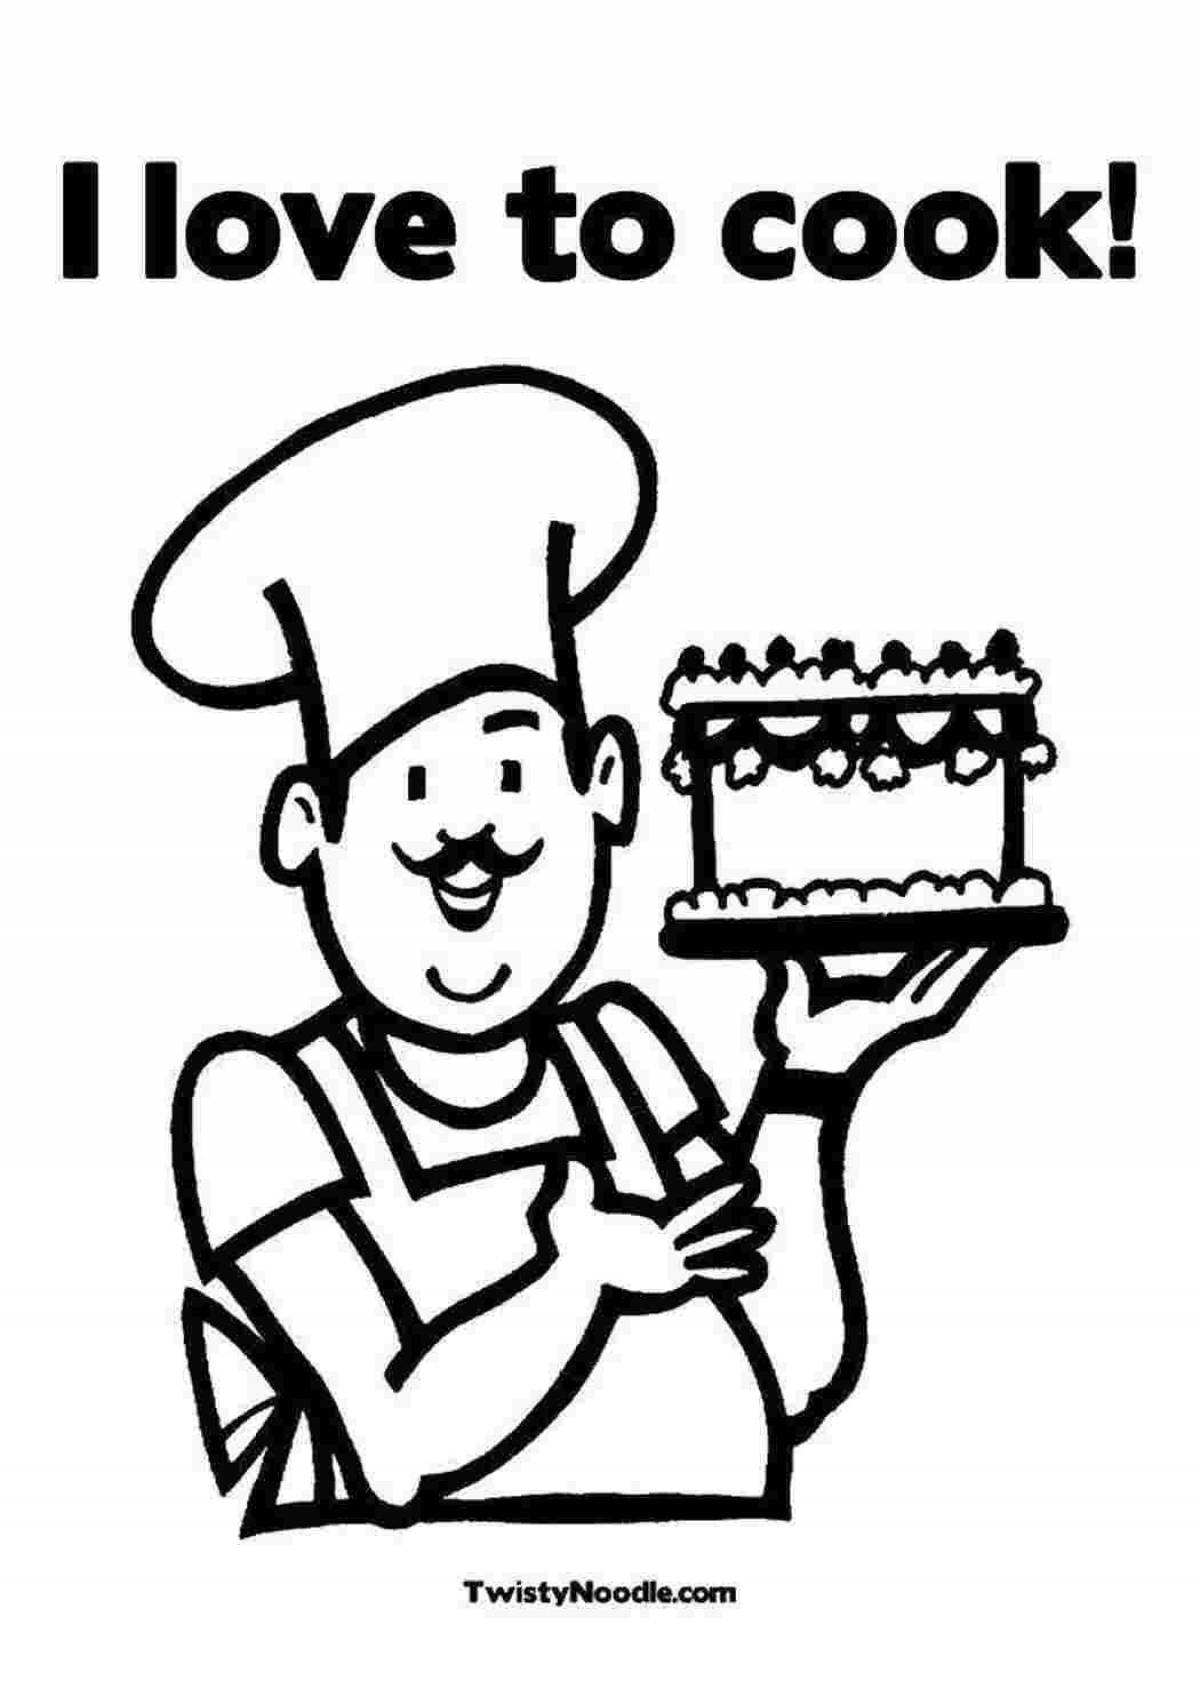 Funny chef coloring book